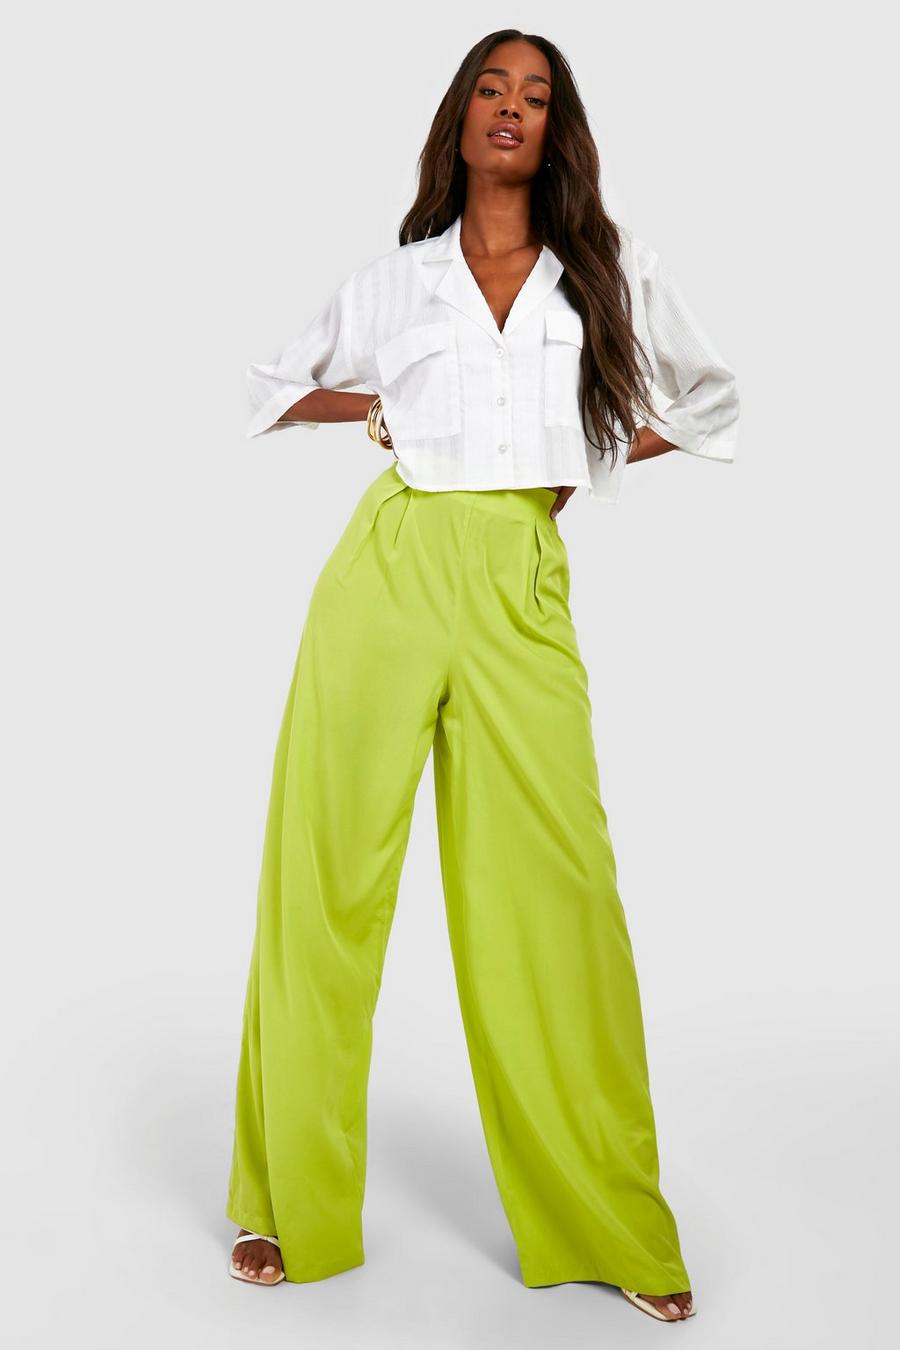 Cheap Pants For Women on